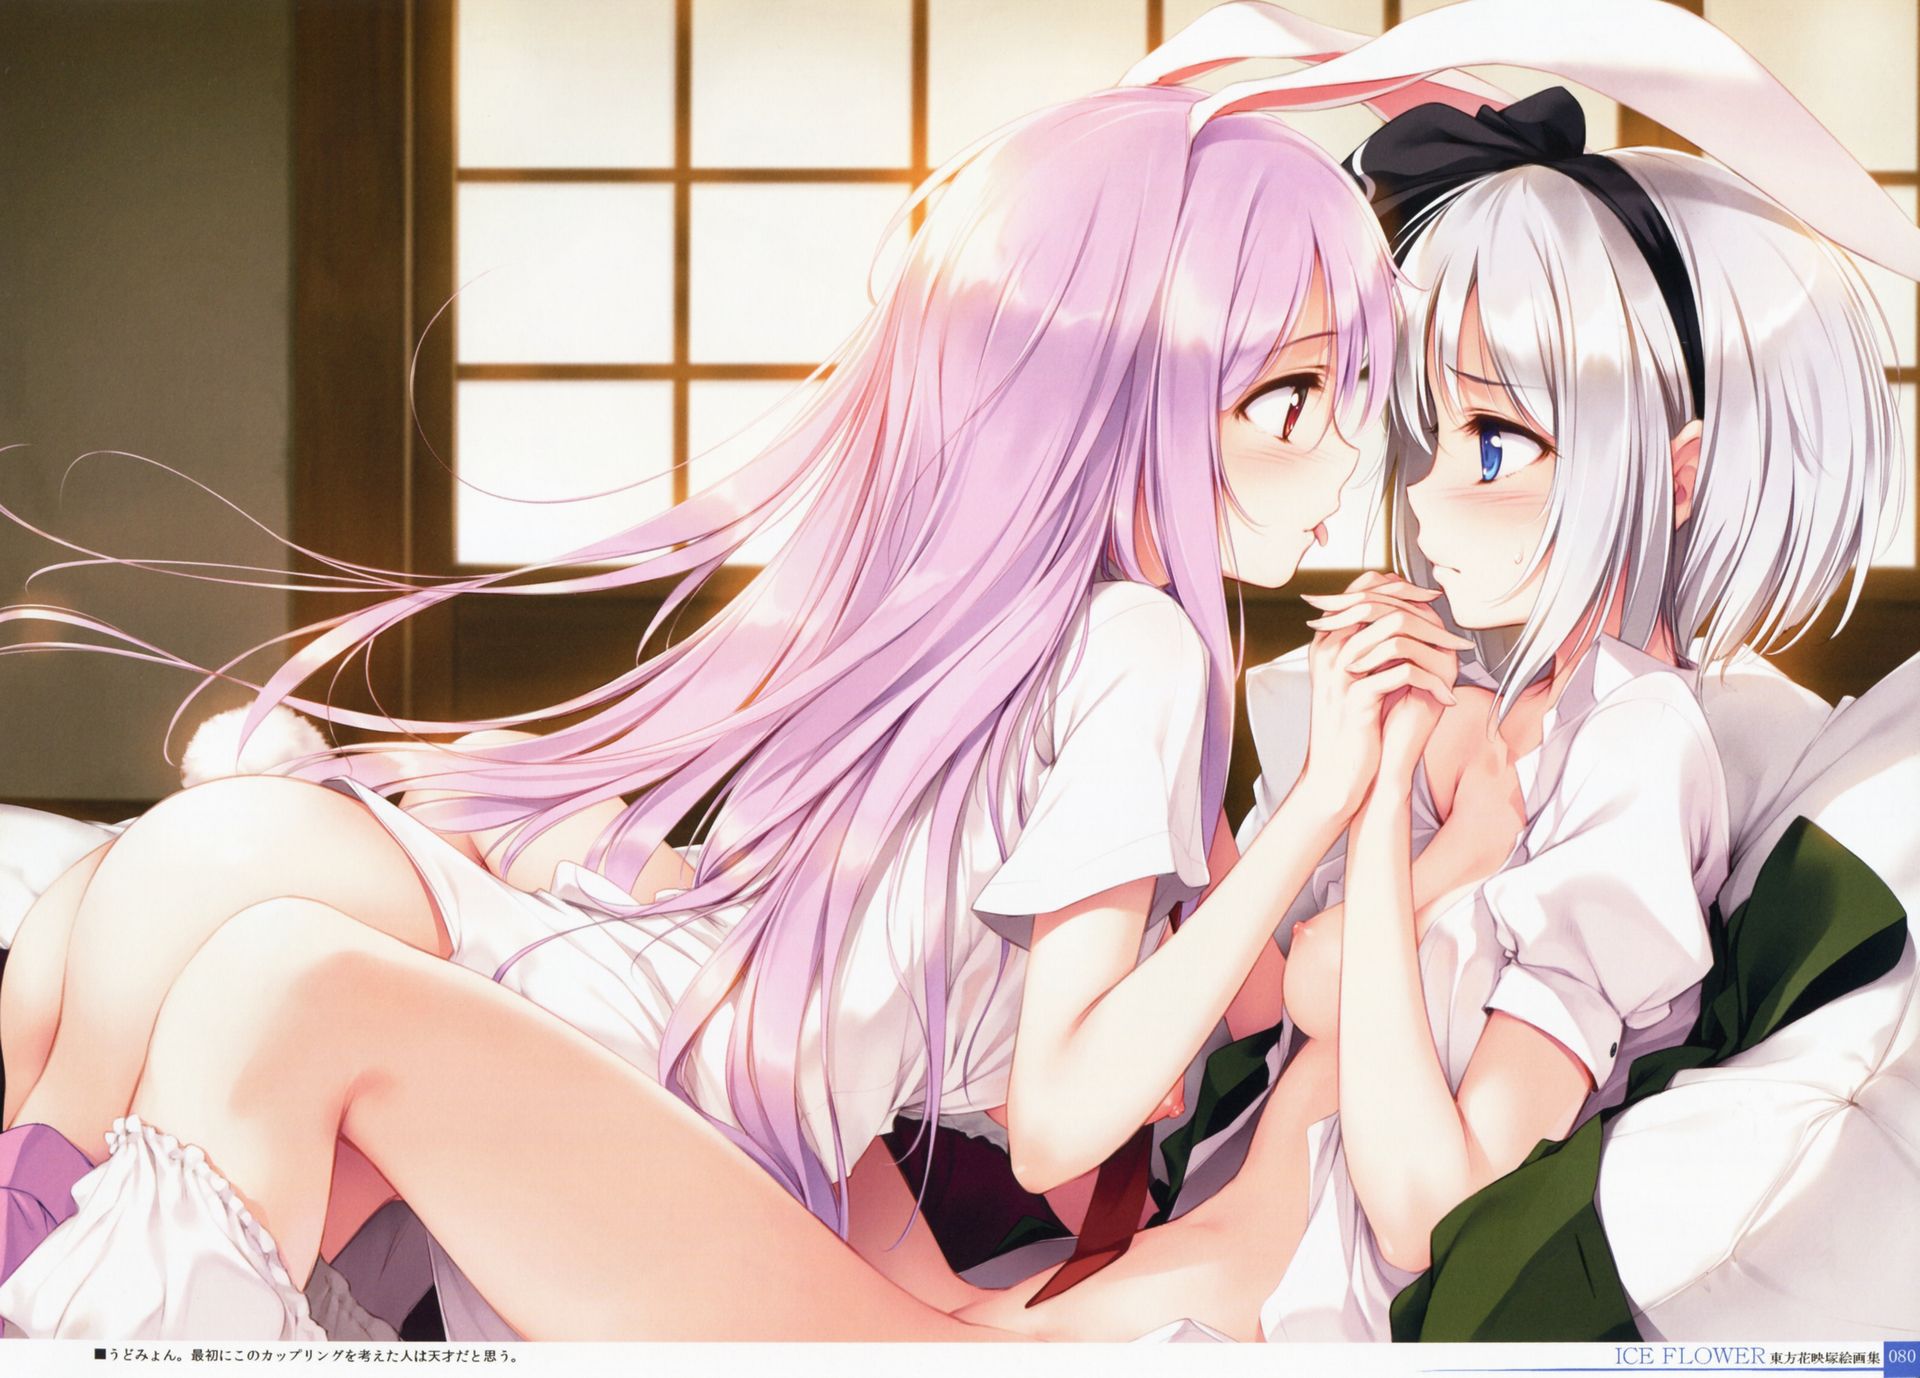 [Secondary-ZIP: Yuri lesbian image, or see other girls doing naughty things. 38